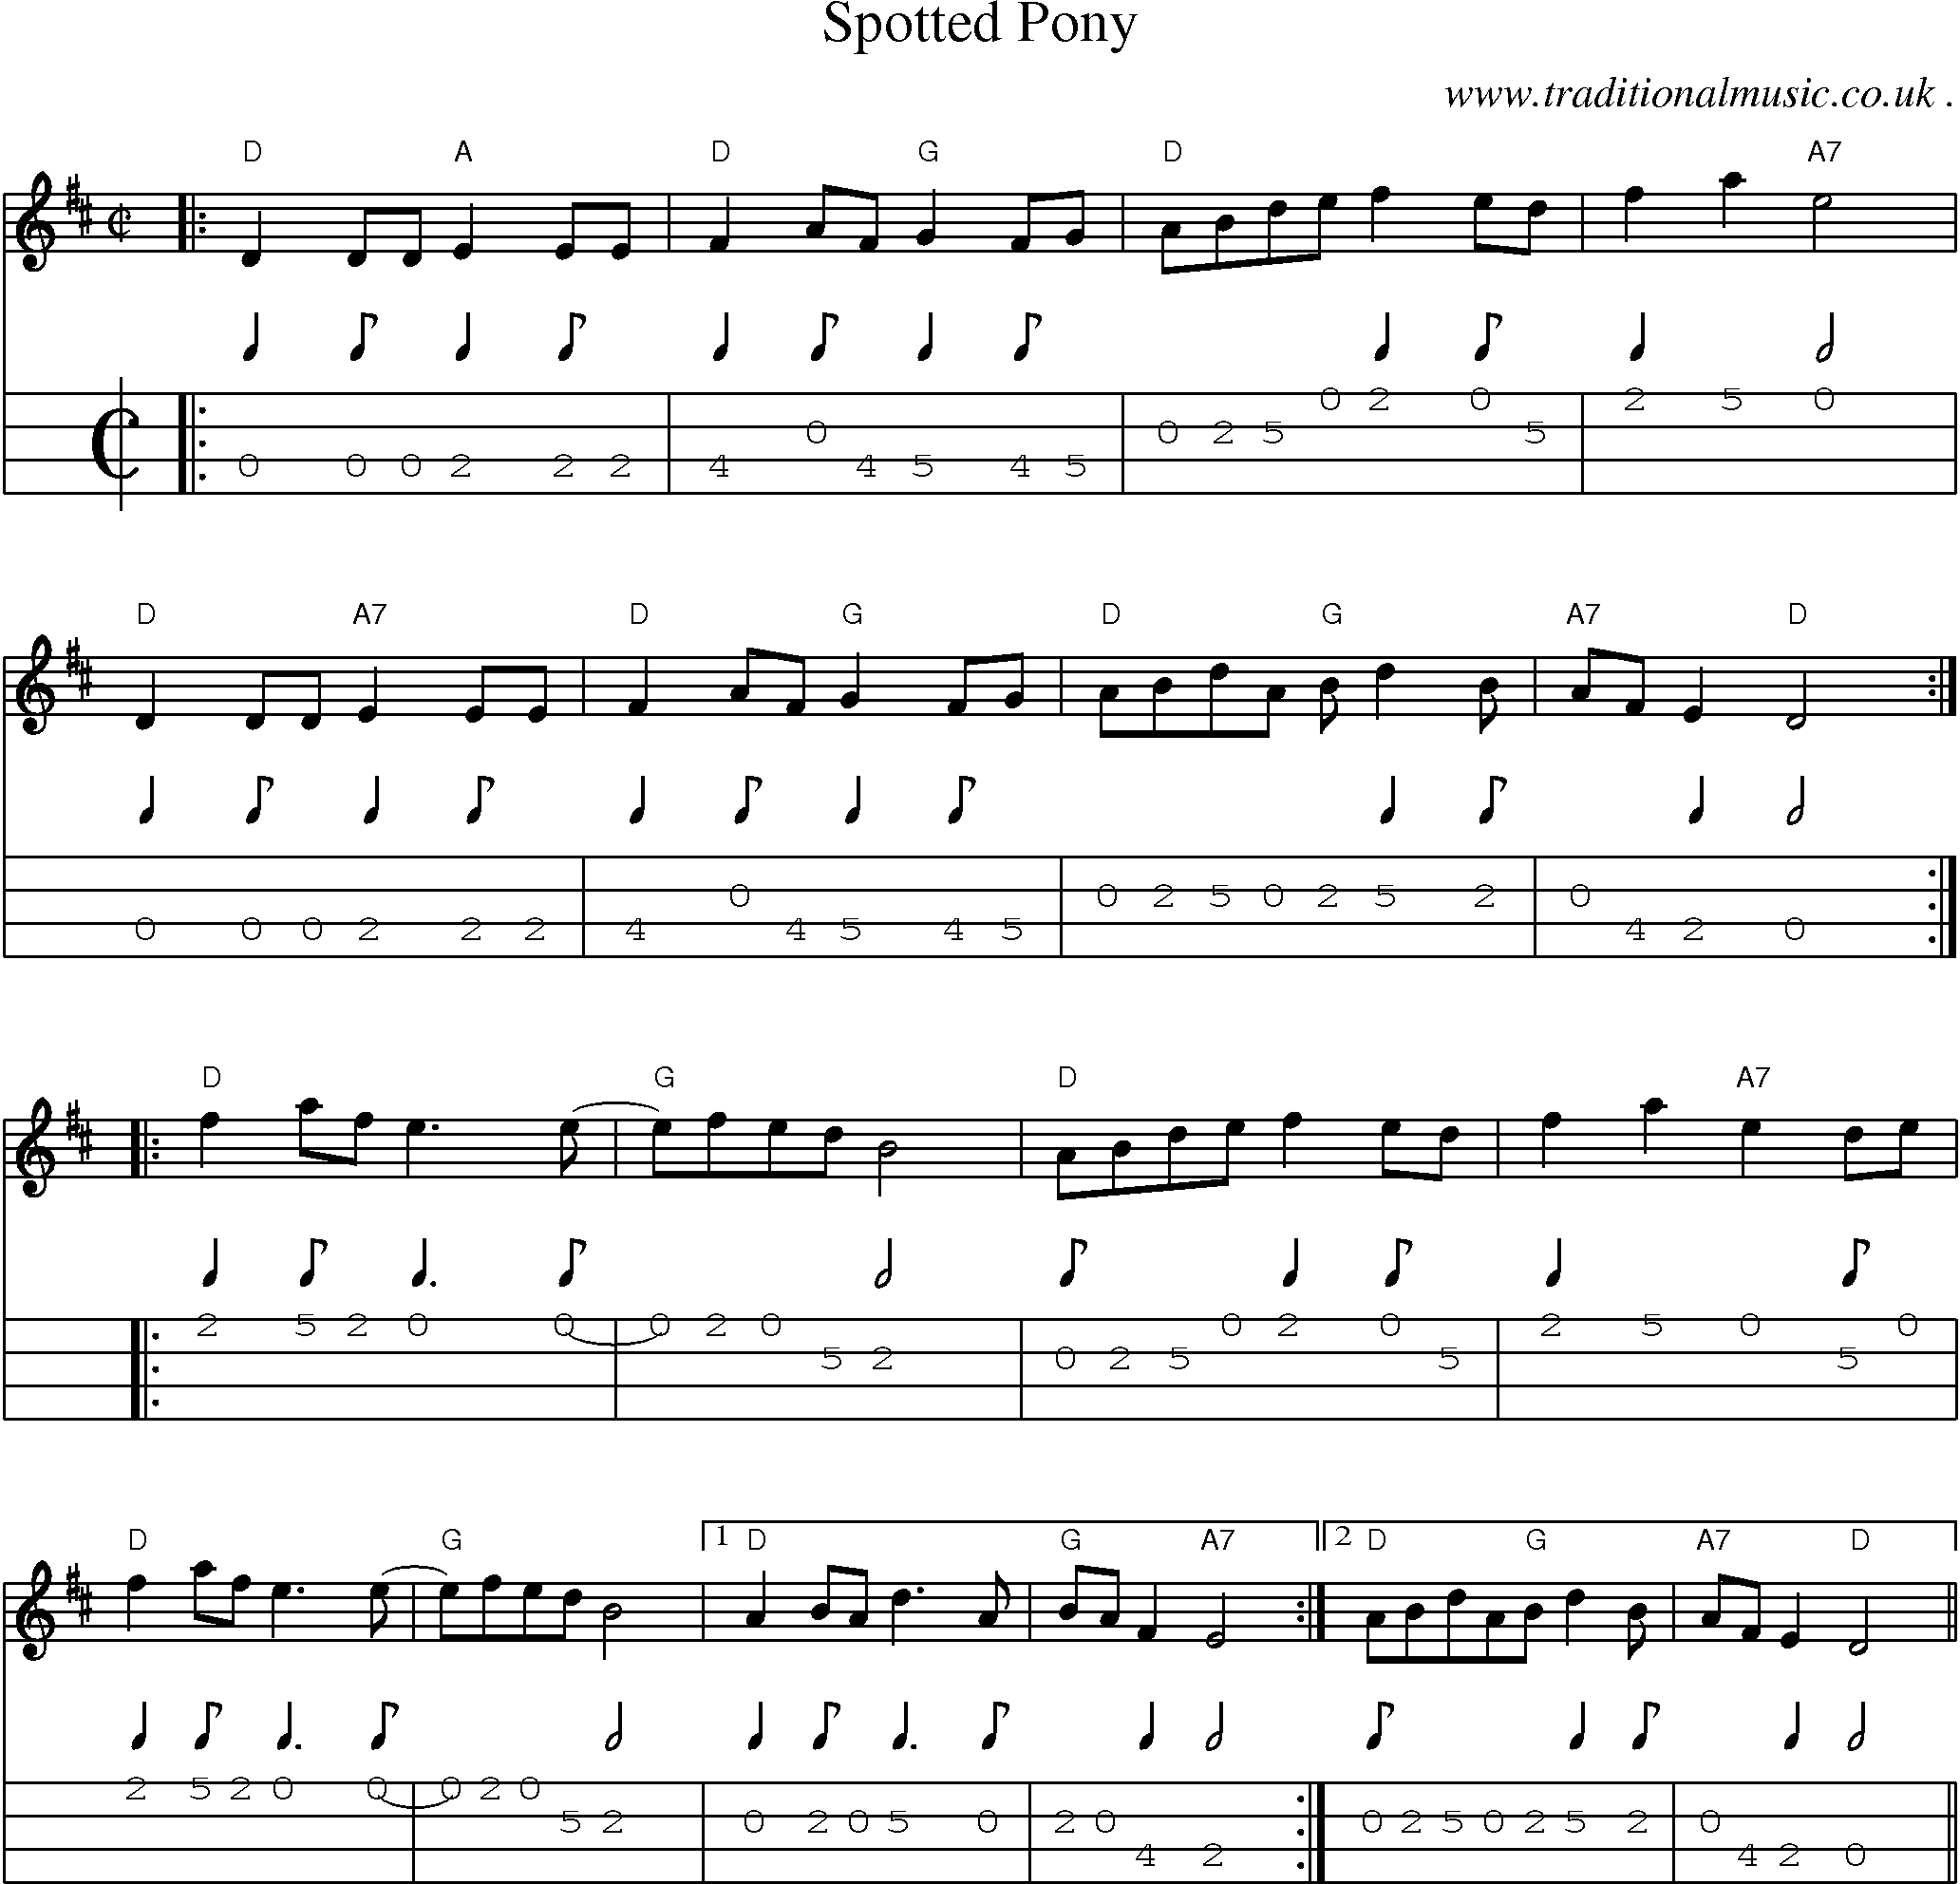 Music Score and Mandolin Tabs for Spotted Pony